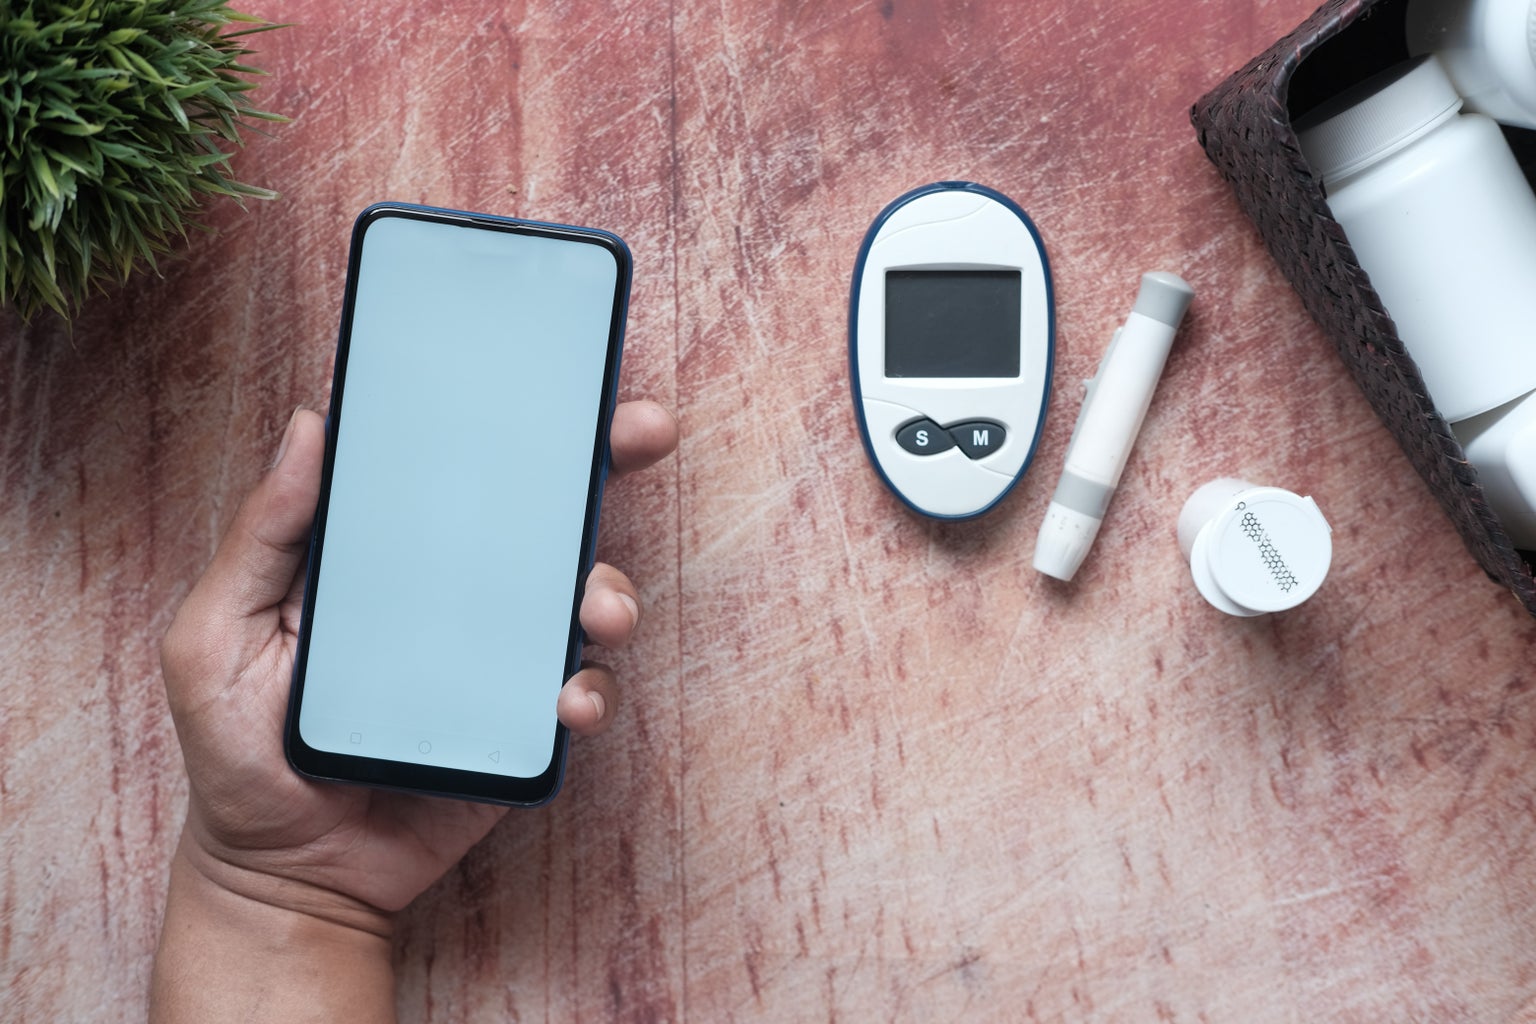 diabetes supplies and cellphone